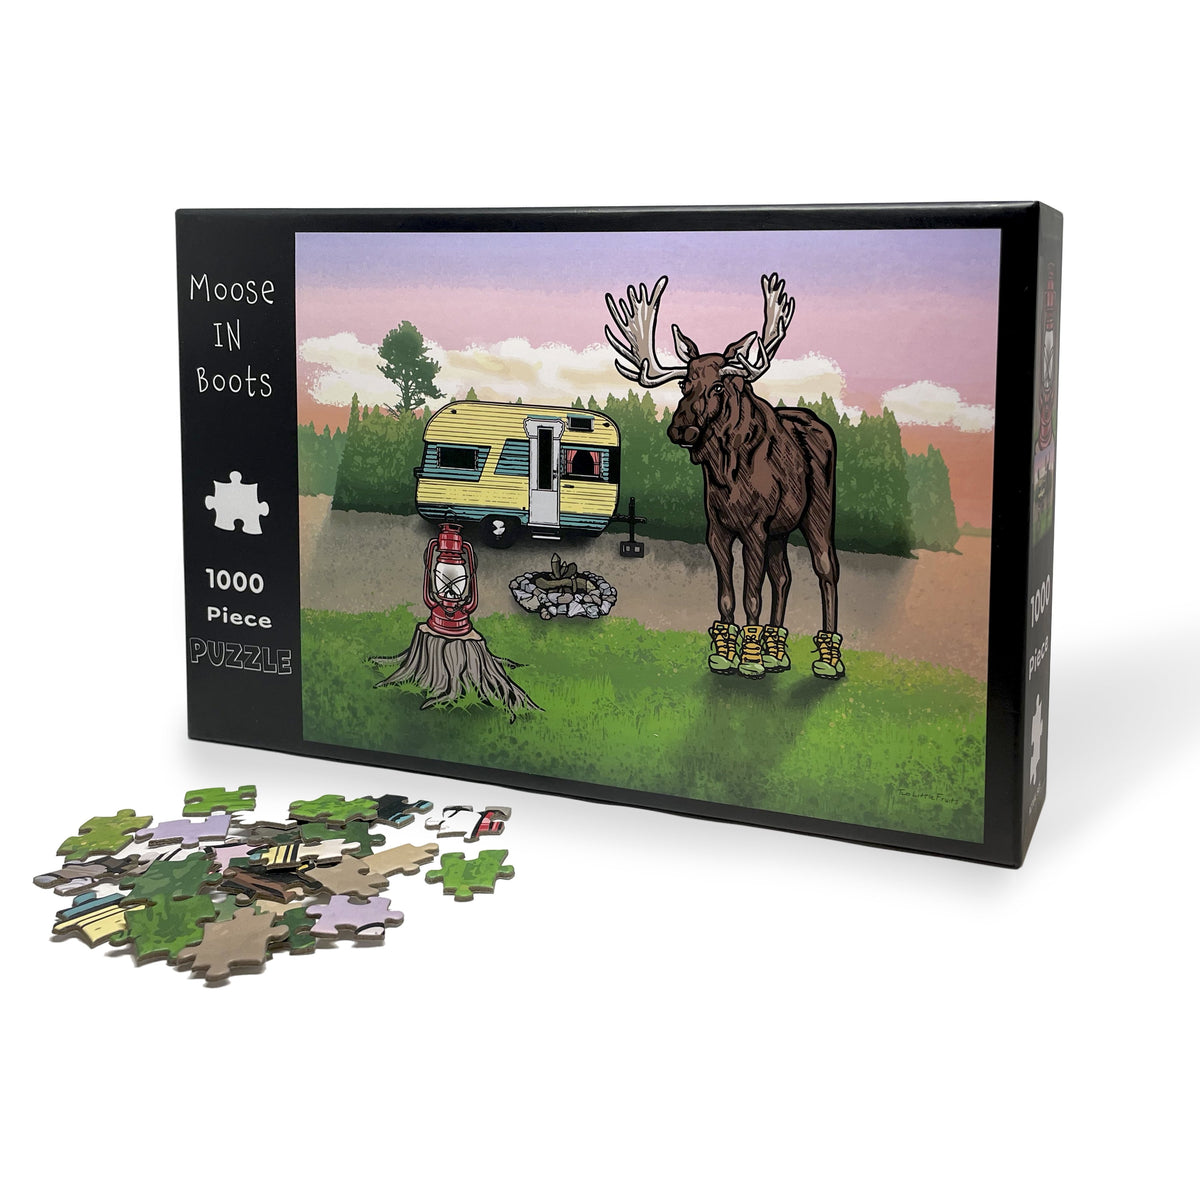 Moose in Boots in front of Camper Artwork for 1000 piece jigsaw puzzle